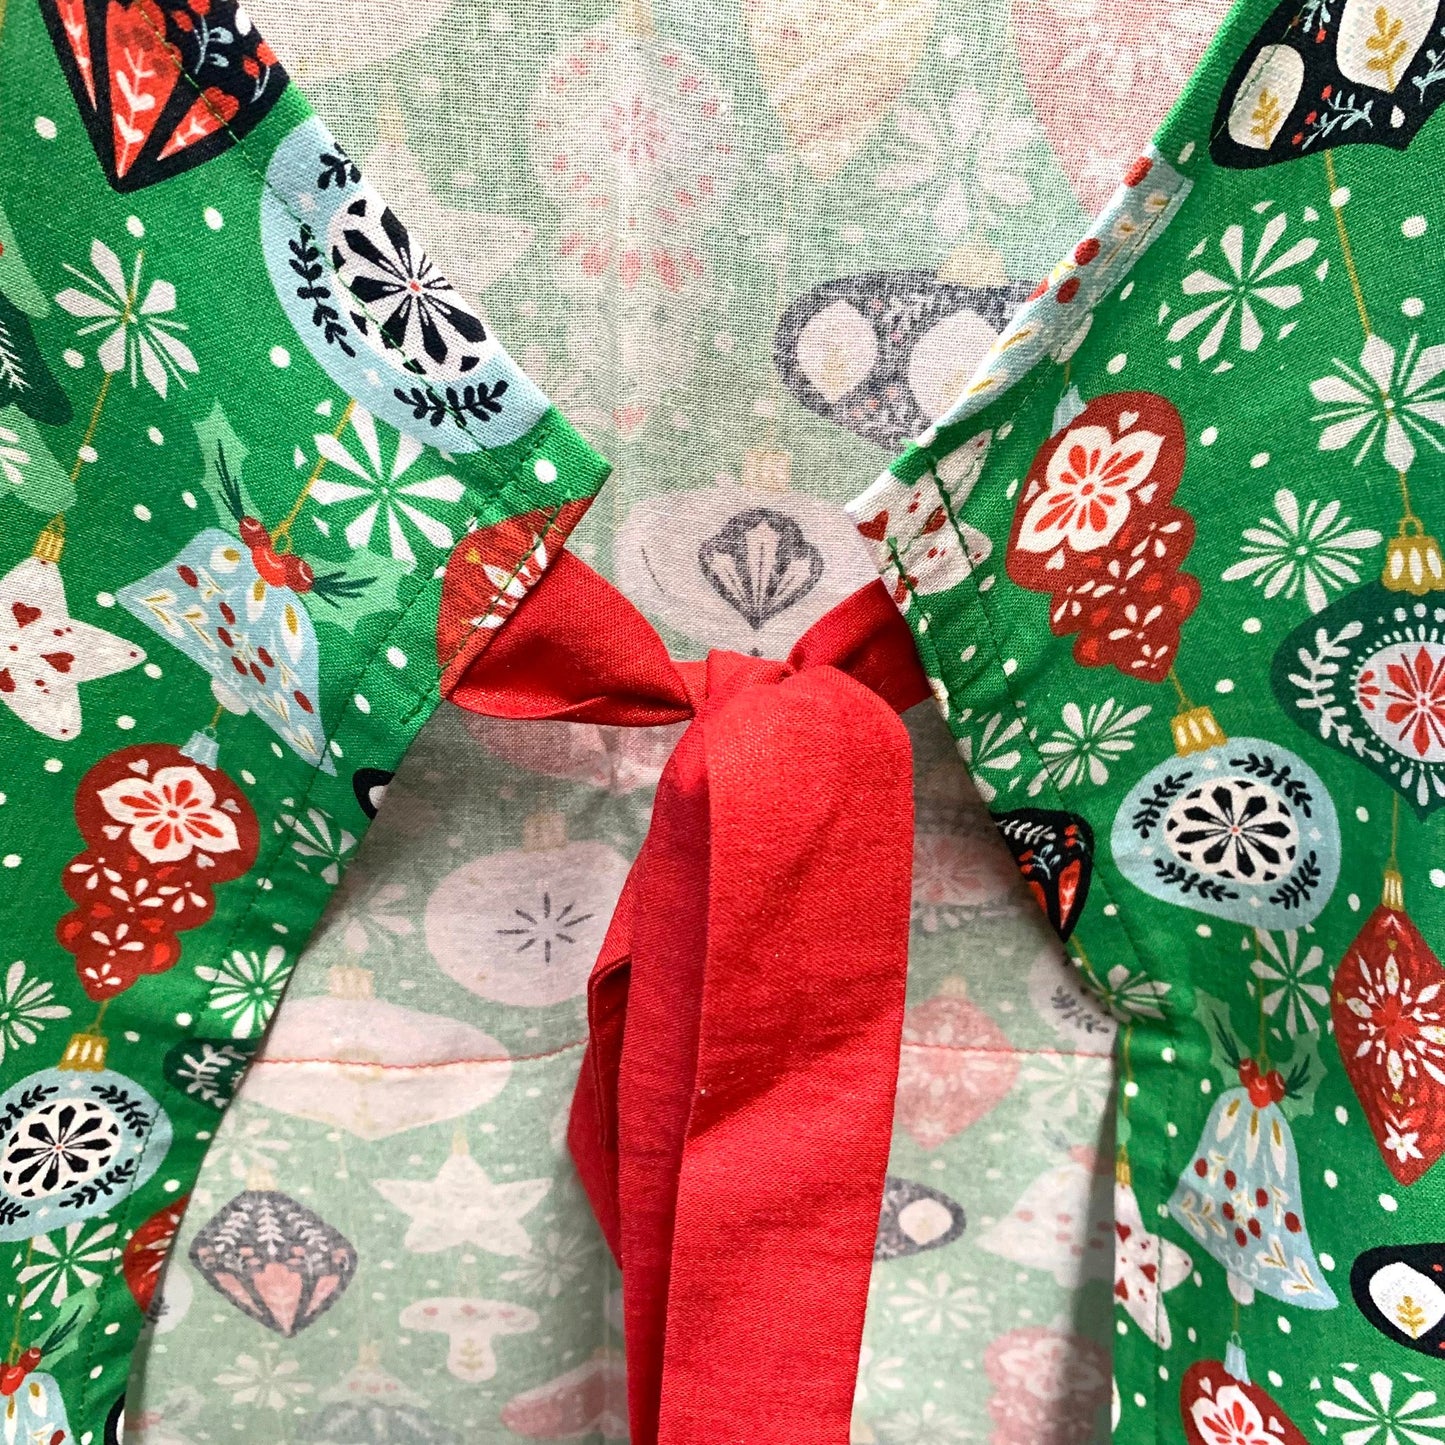 MAKIN' WHOOPEE - "Green Baubles" Christmas Apron